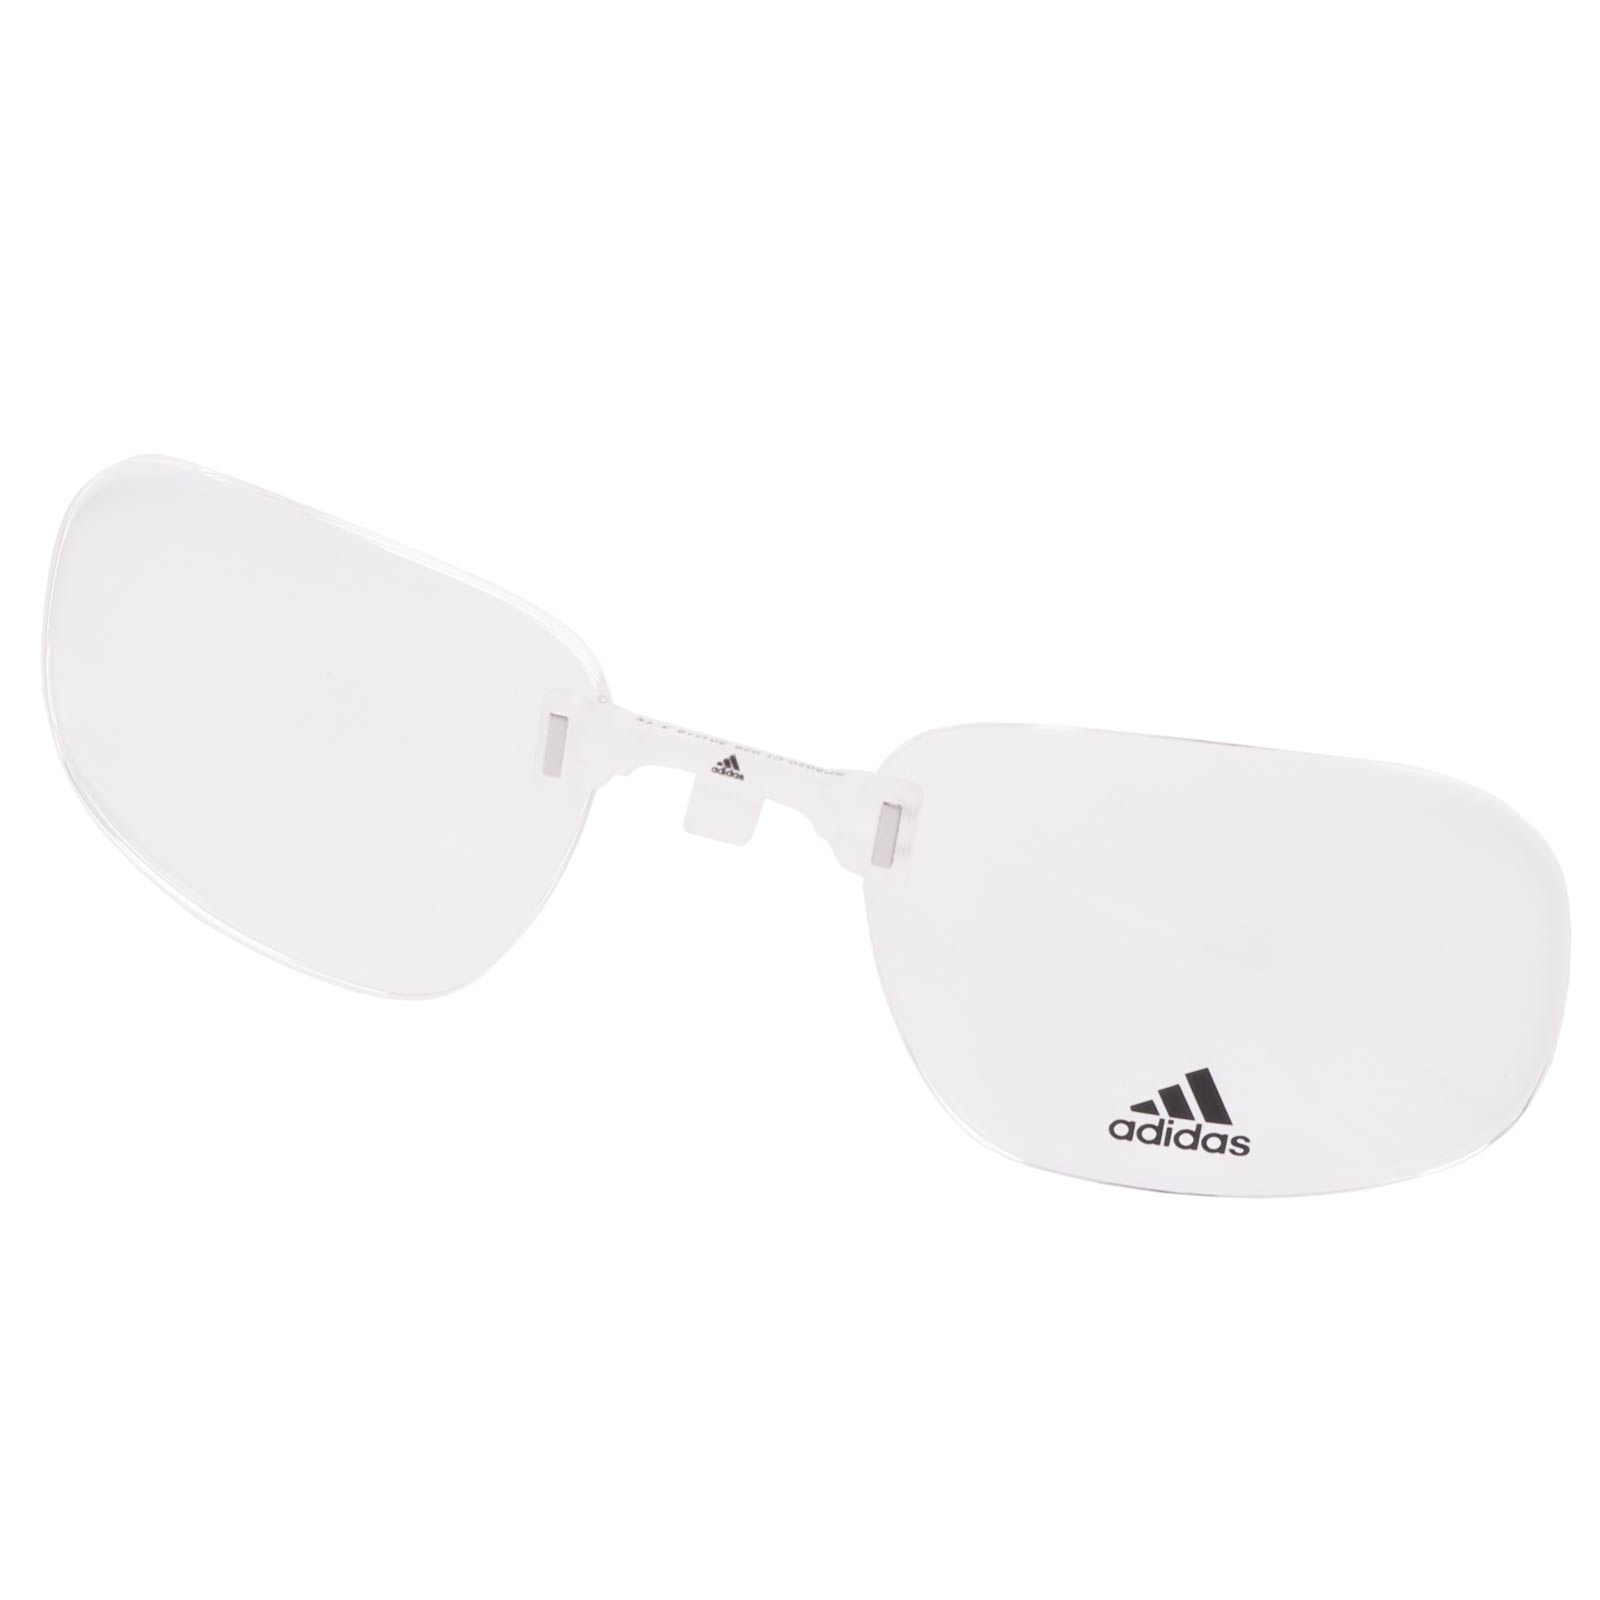 Image of adidas SP5020-CI Sunglasses Clip-In Adapter for SP0056 - Crystal